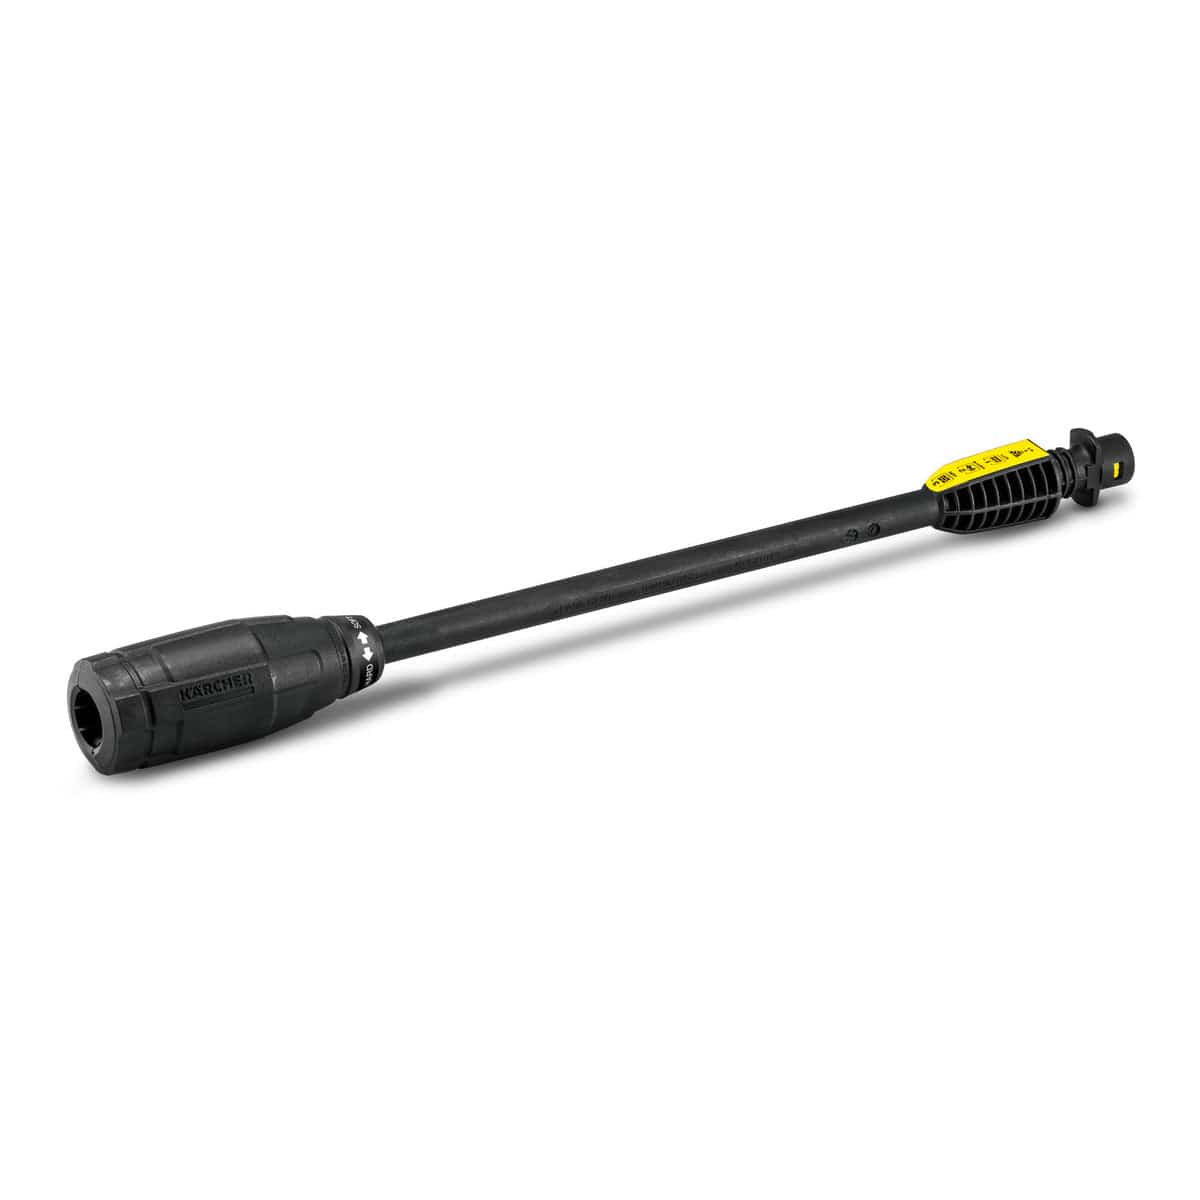 Karcher Full Control Vario Power Jet for K2 & K3 - VP120  | Supply Master | Accra, Ghana Cleaning Equipment Accessories Buy Tools hardware Building materials